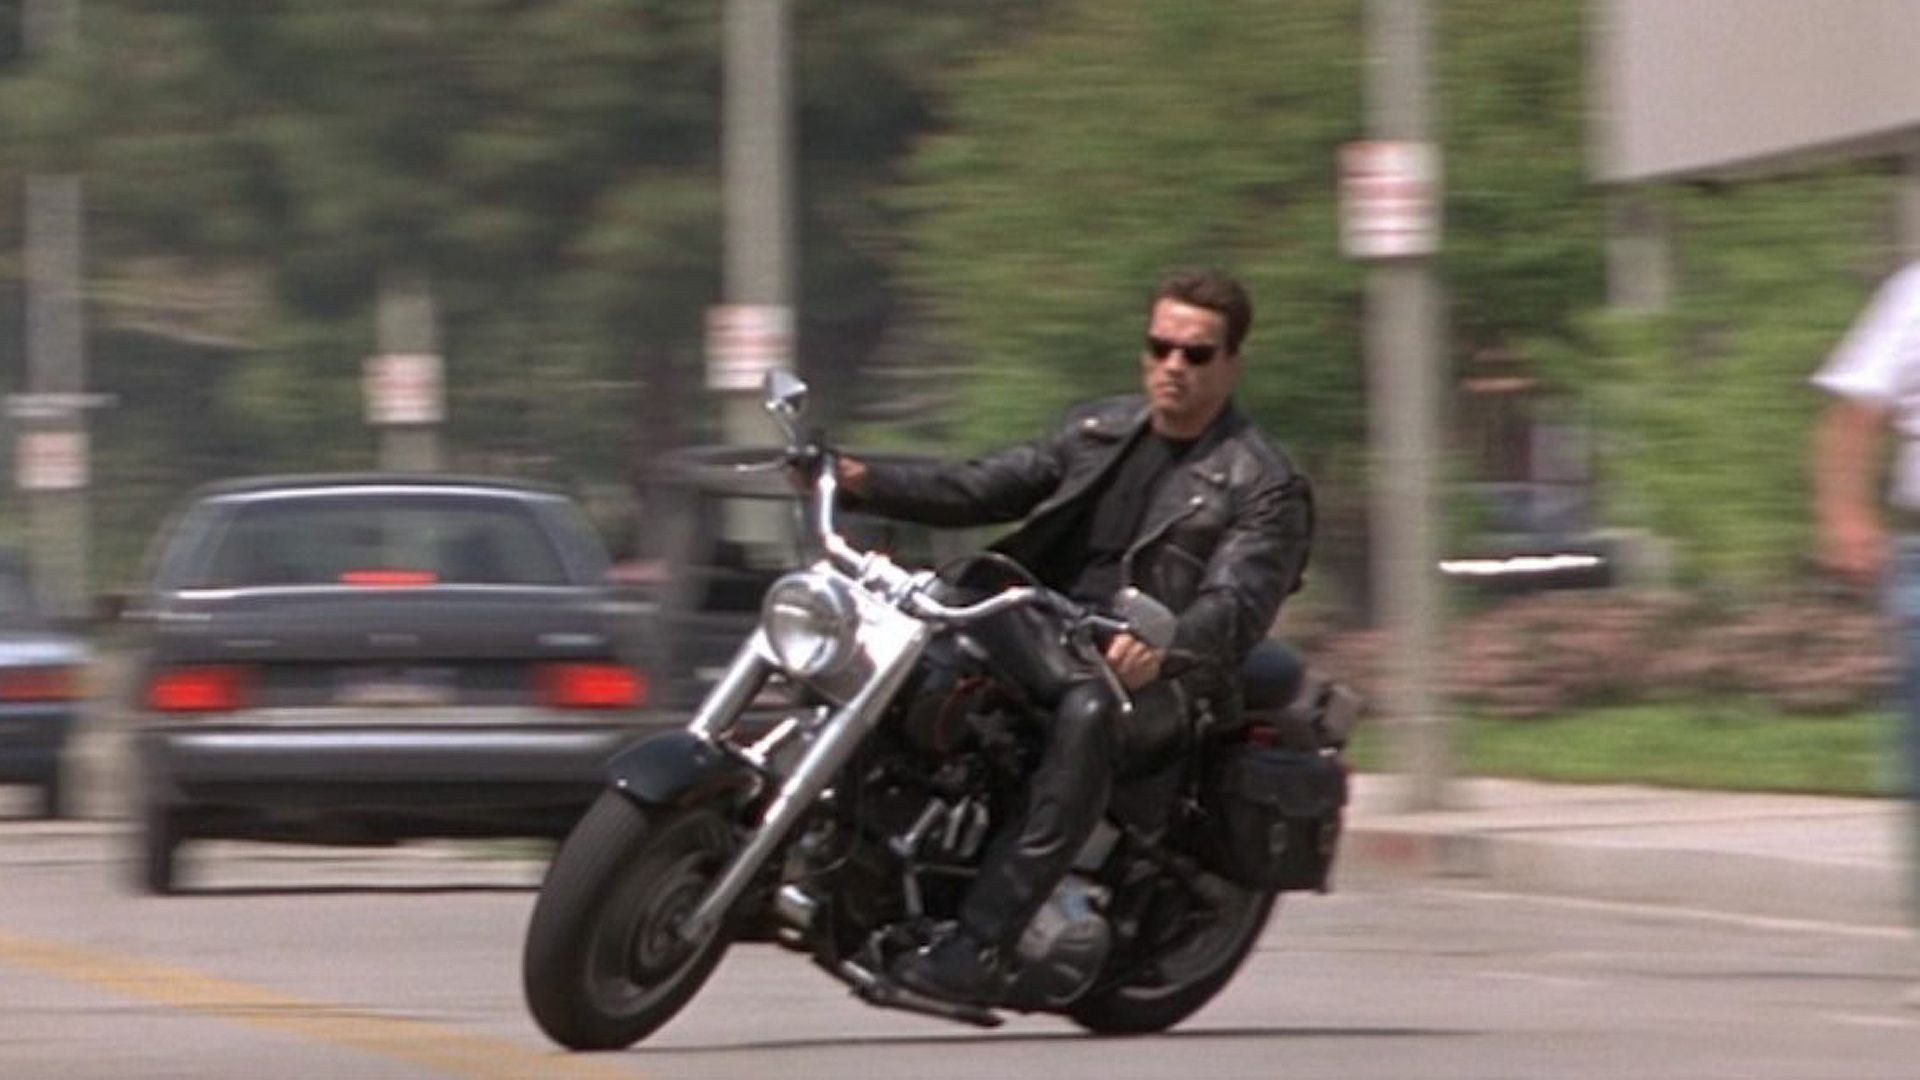 Famous 1991 Harley-Davidson Fat Boy motorcycle in the movie ‘Terminator 2 - Judgement Day’